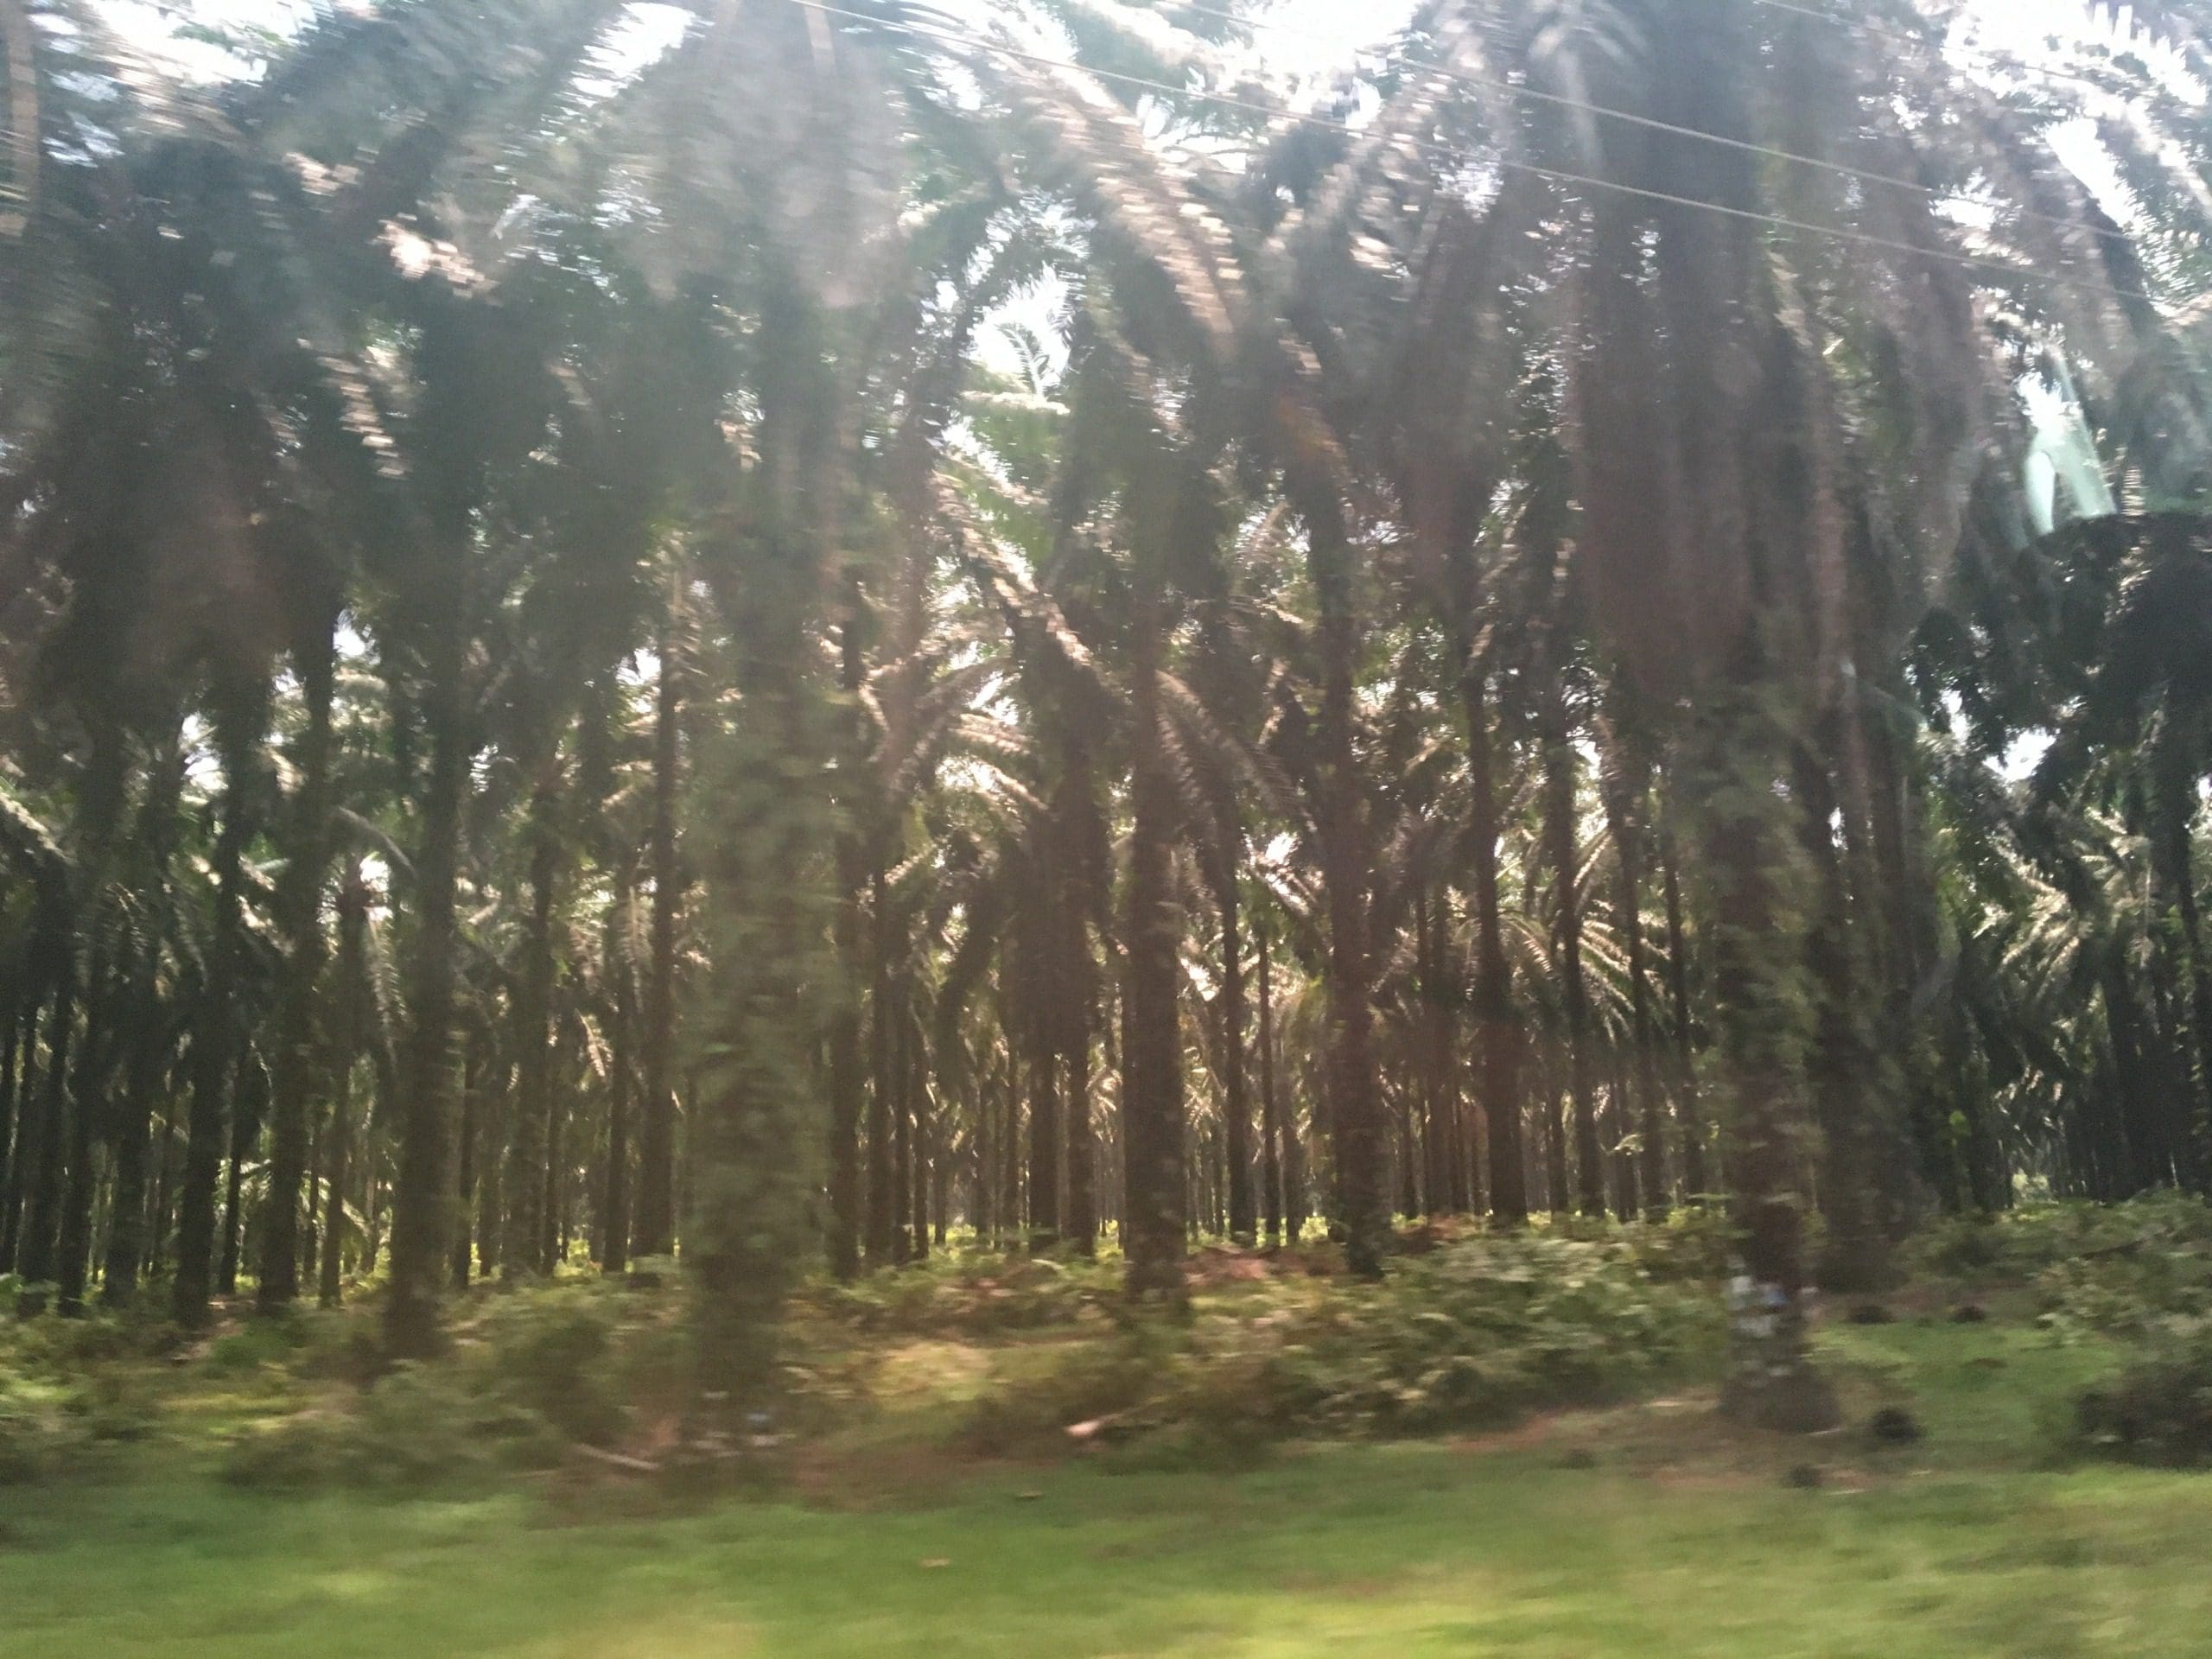 Palm oil forests on the way to Bukit Lawang, sadly natural habitat is being destroyed to make room for more of these plantations